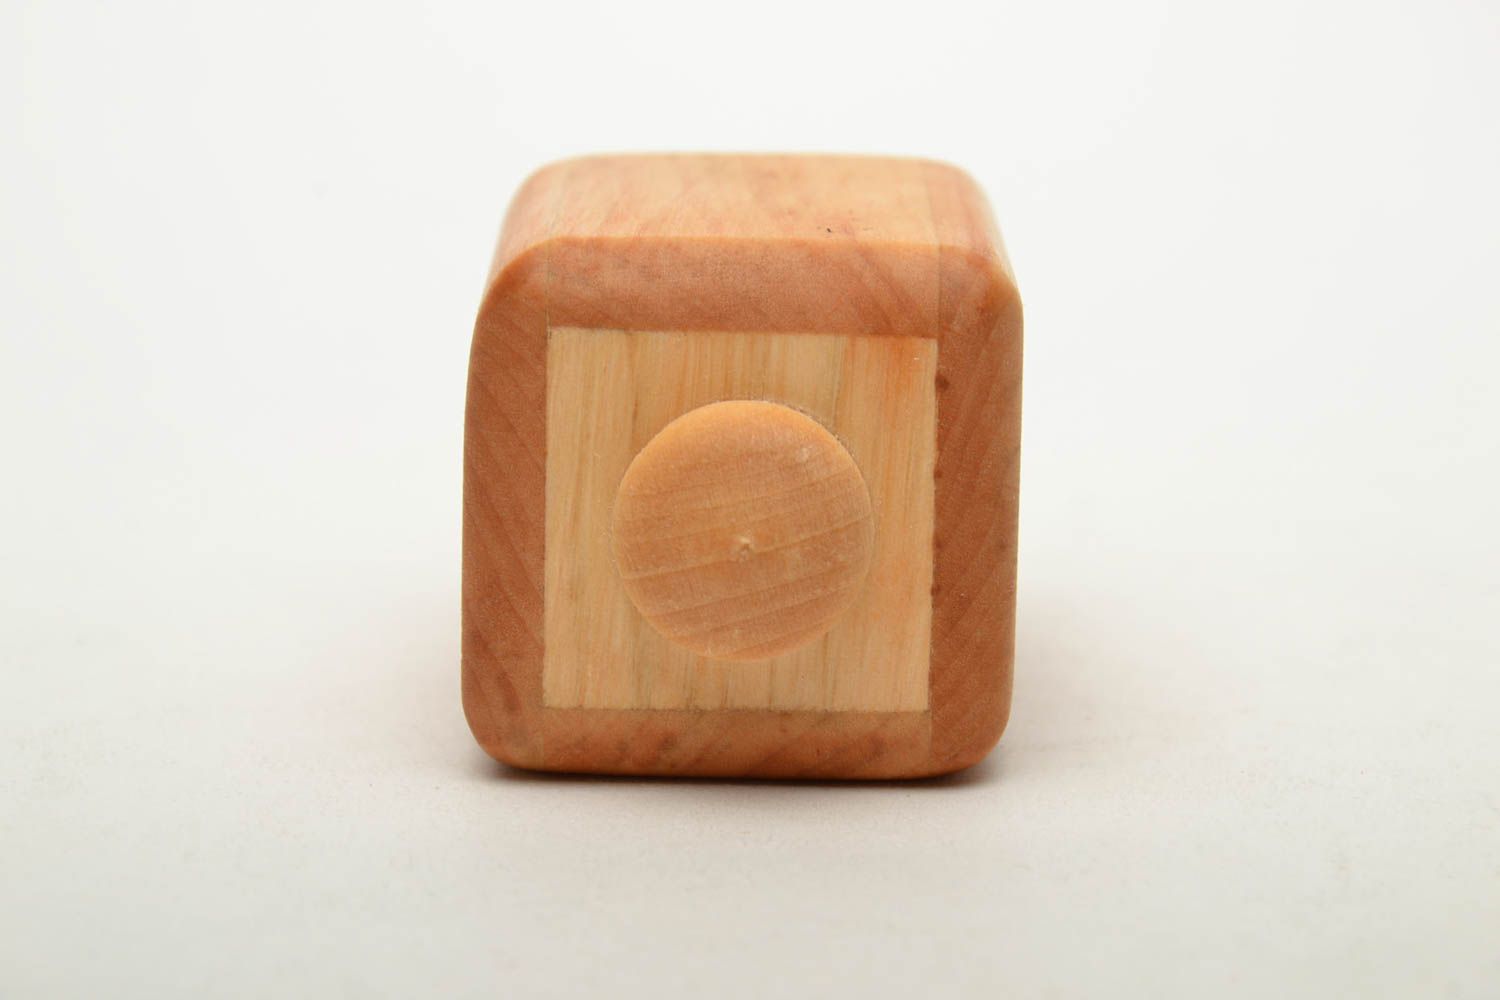 Wooden toy rattle photo 4